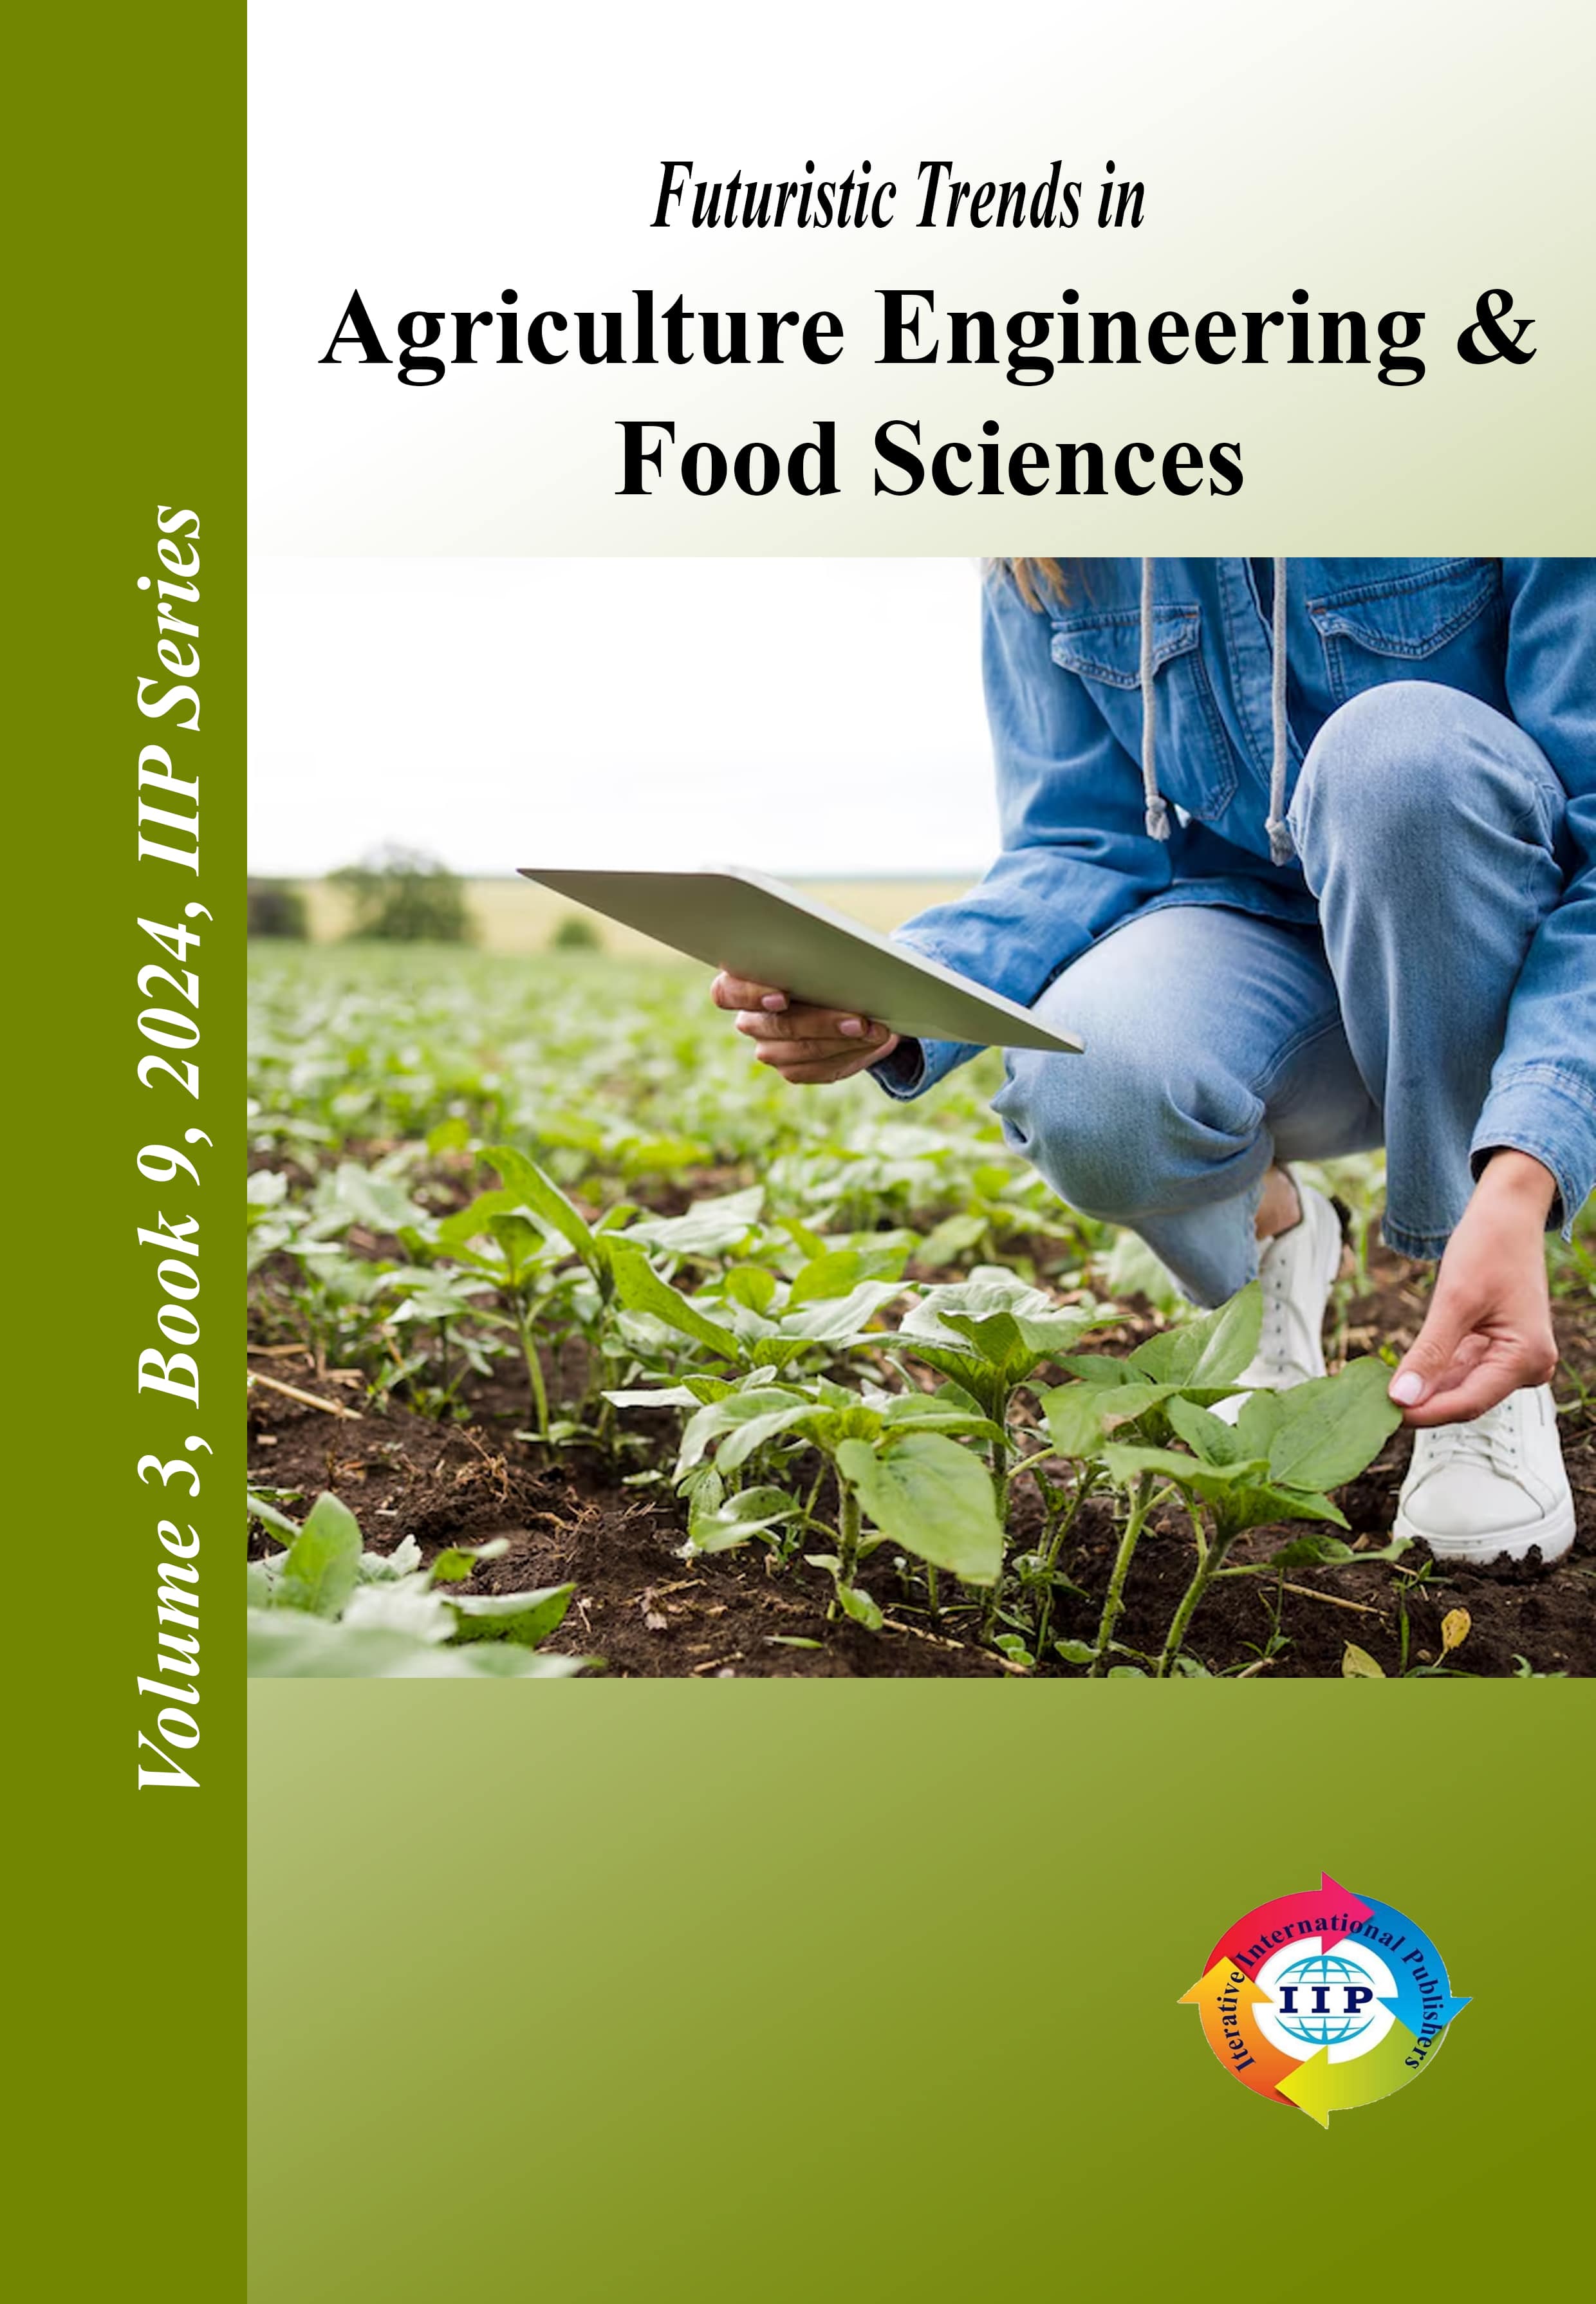 Futuristic Trends in Agriculture Engineering & Food Sciences Volume 3 Book 9